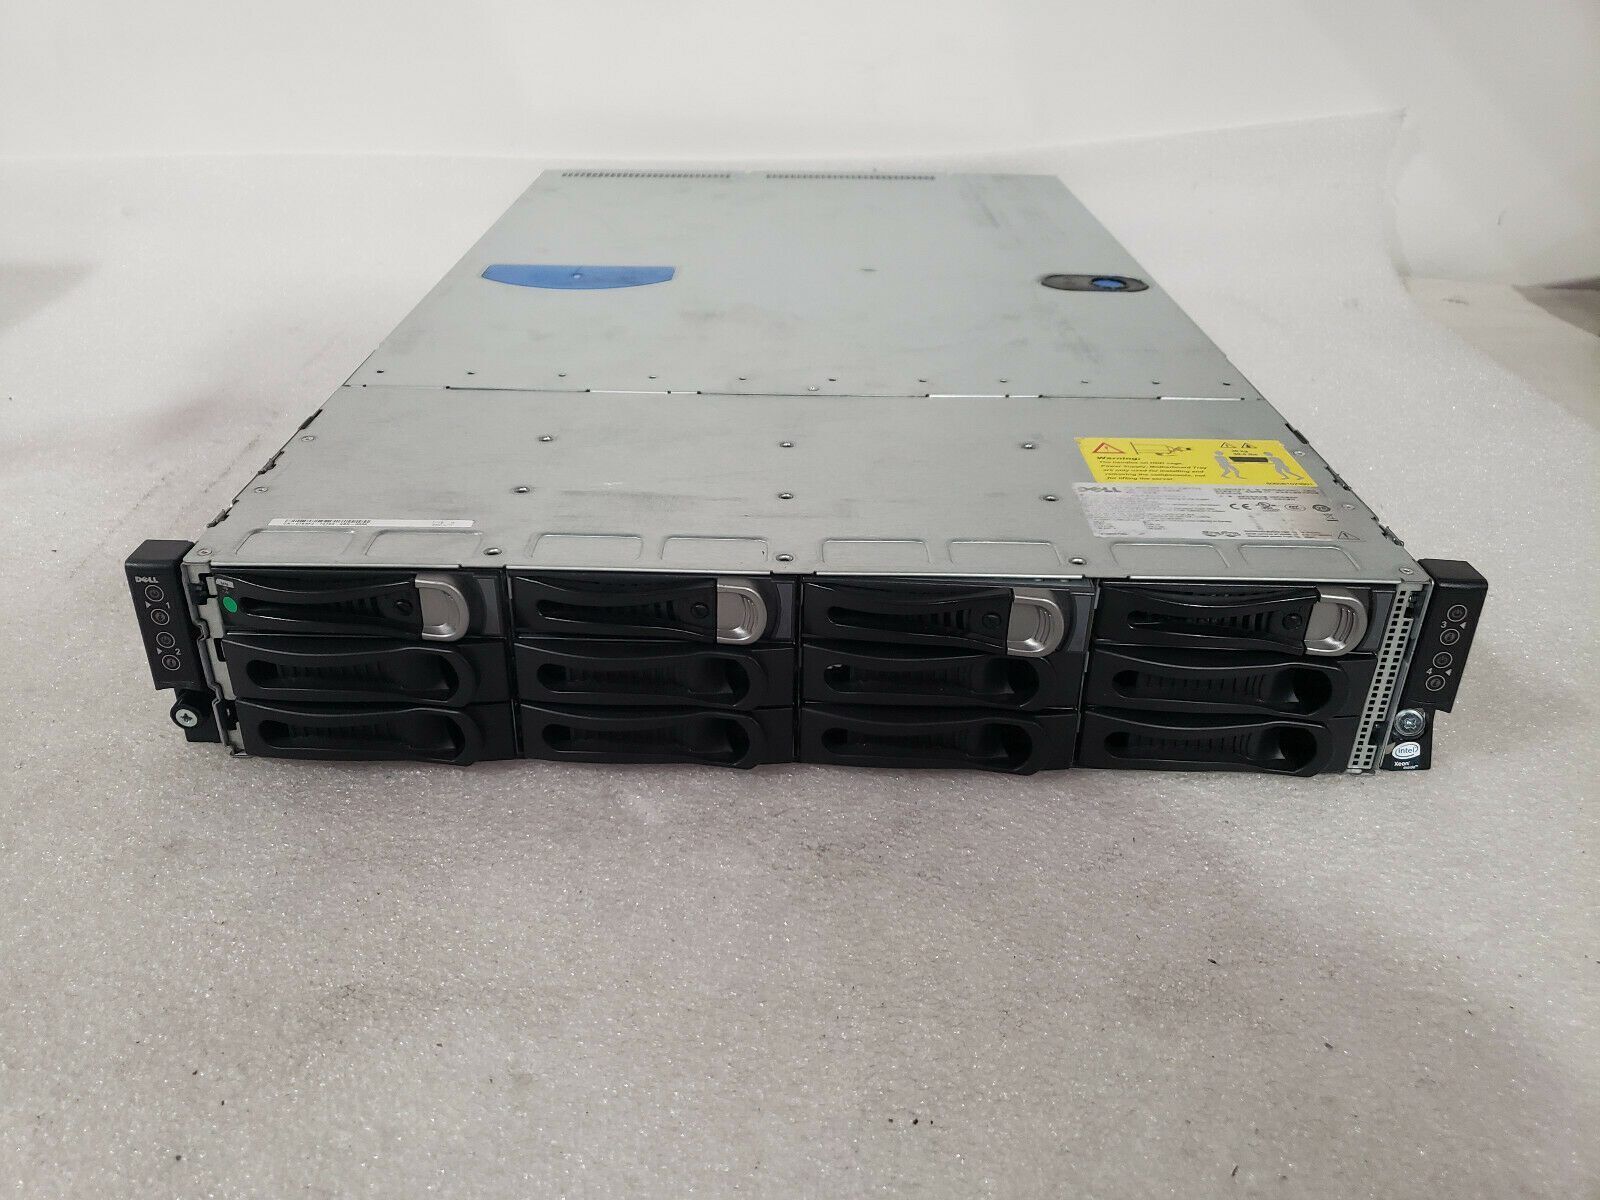 Dell Poweredge C6100 8x E5645 2.40Ghz 48 Cores 128GB No HDD 6GBPS